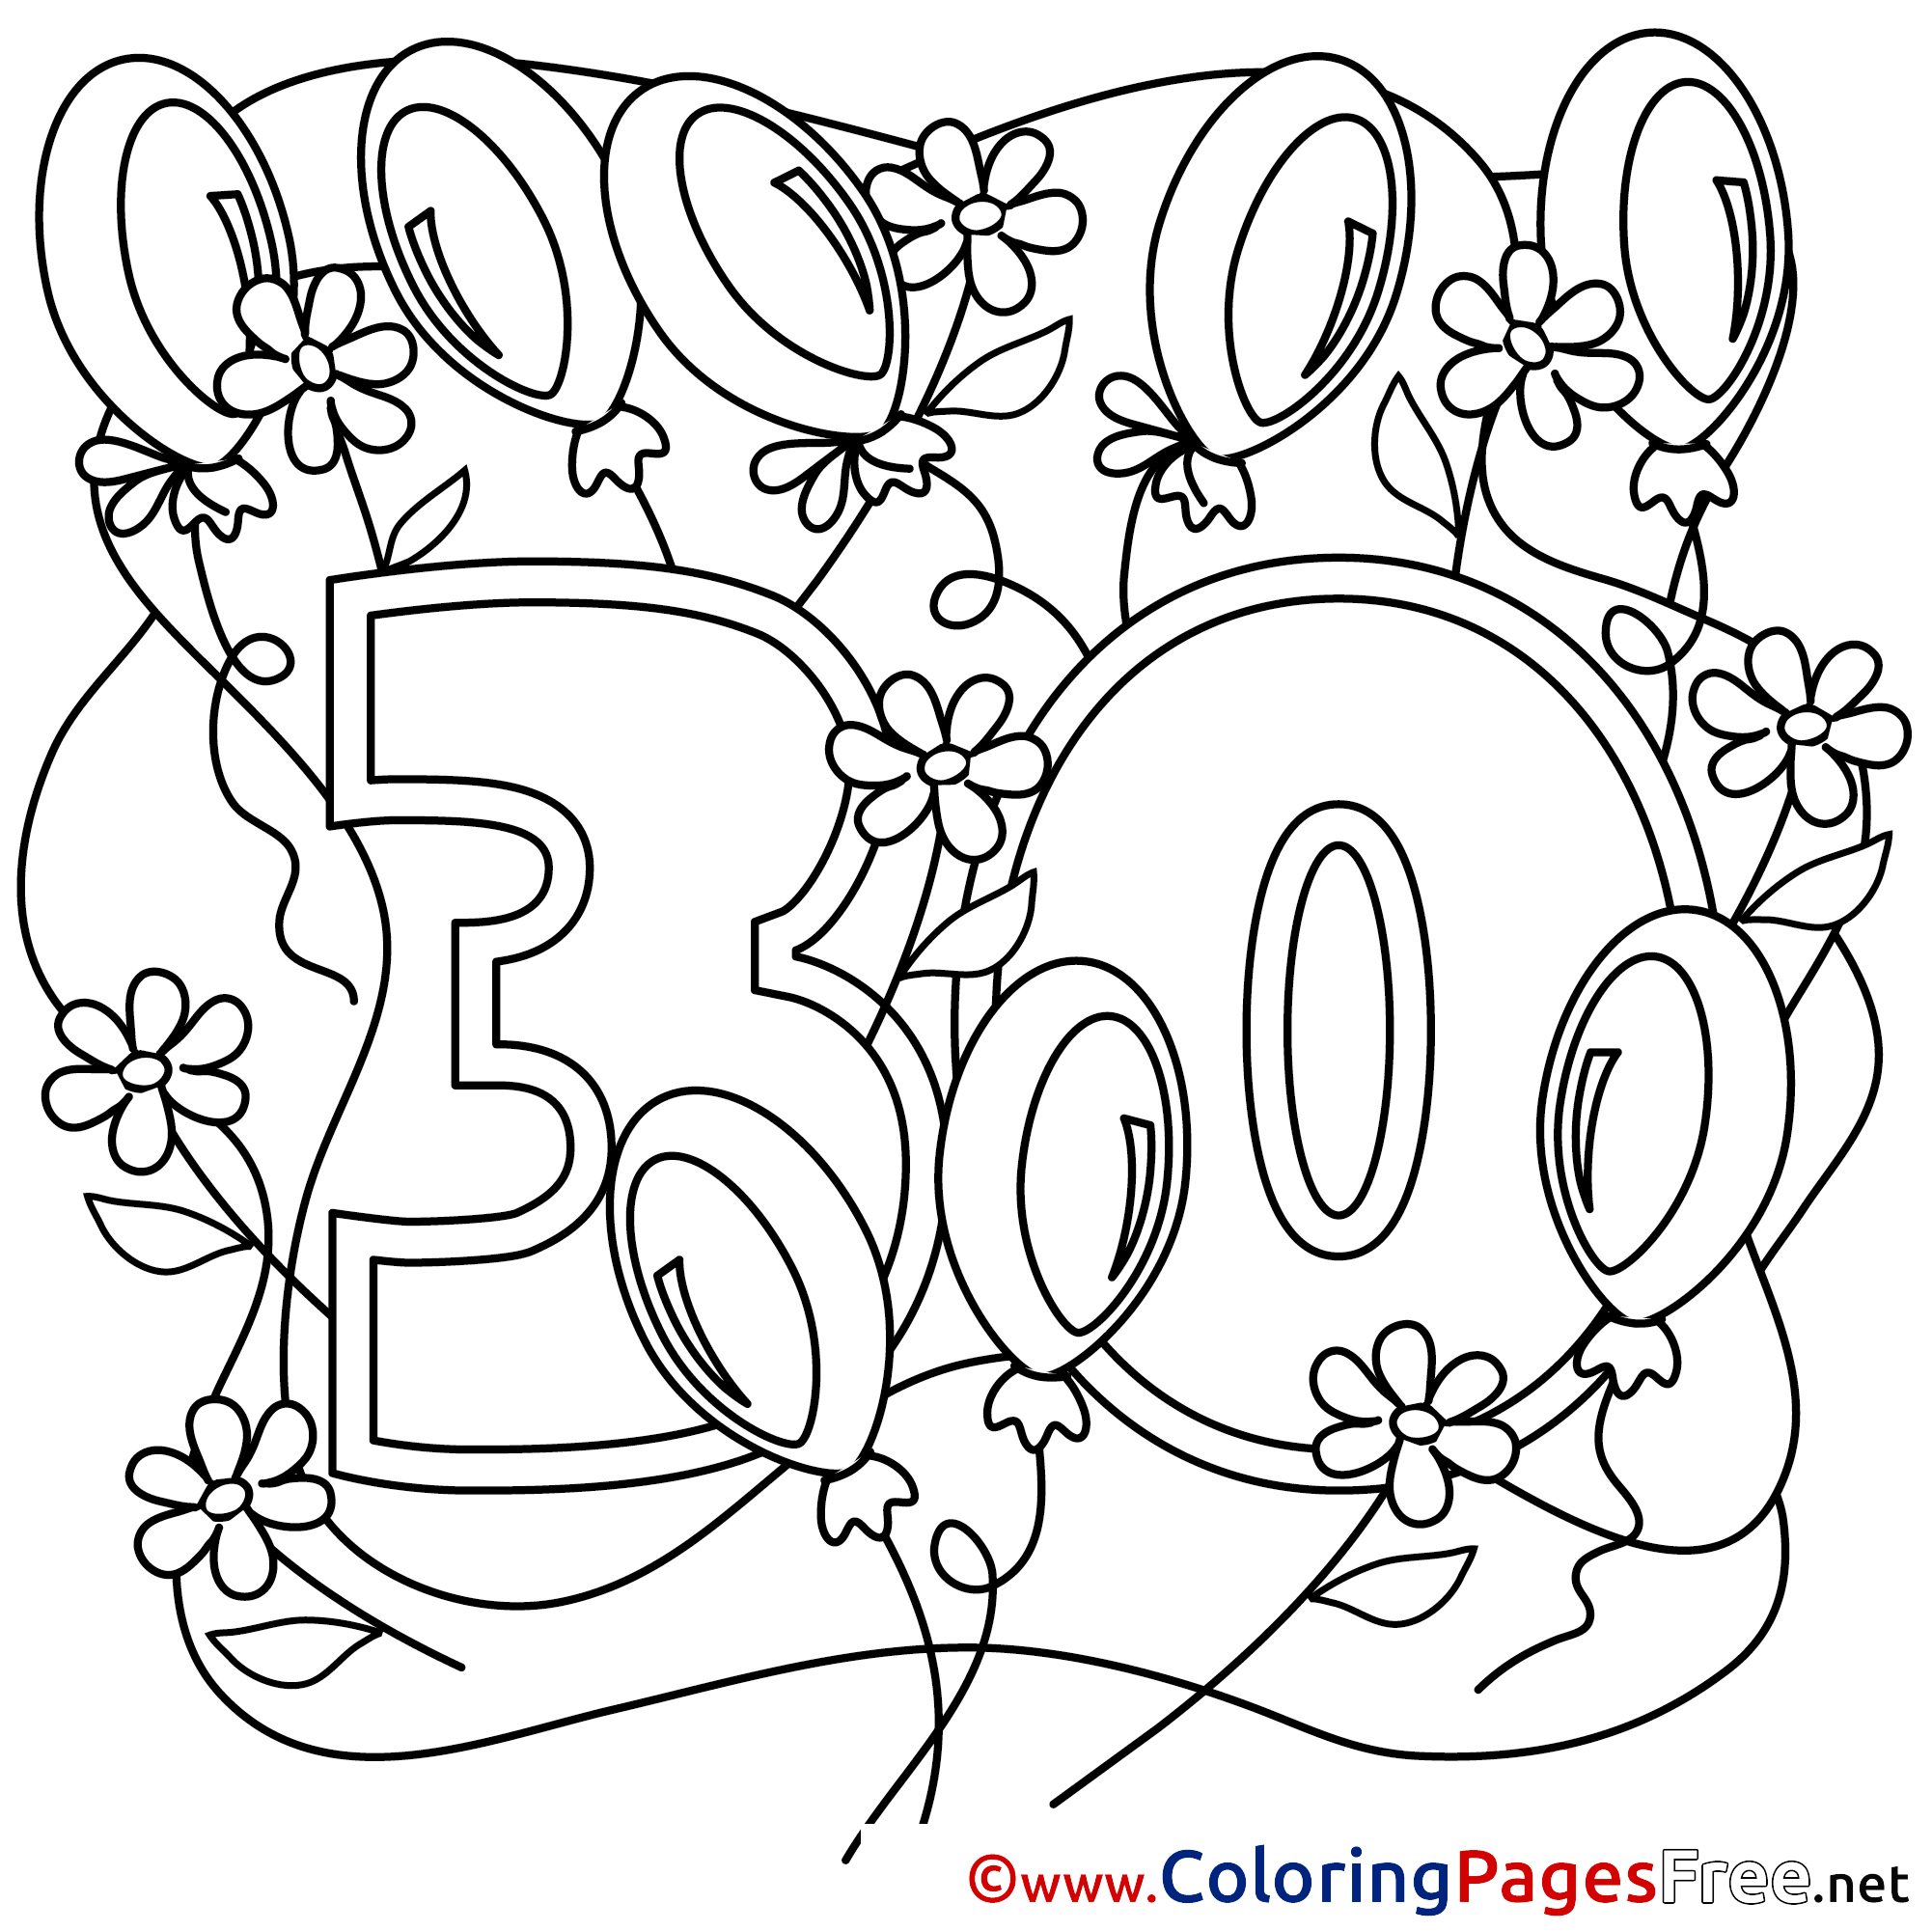 happy-30th-birthday-coloring-pages-coloring-pages